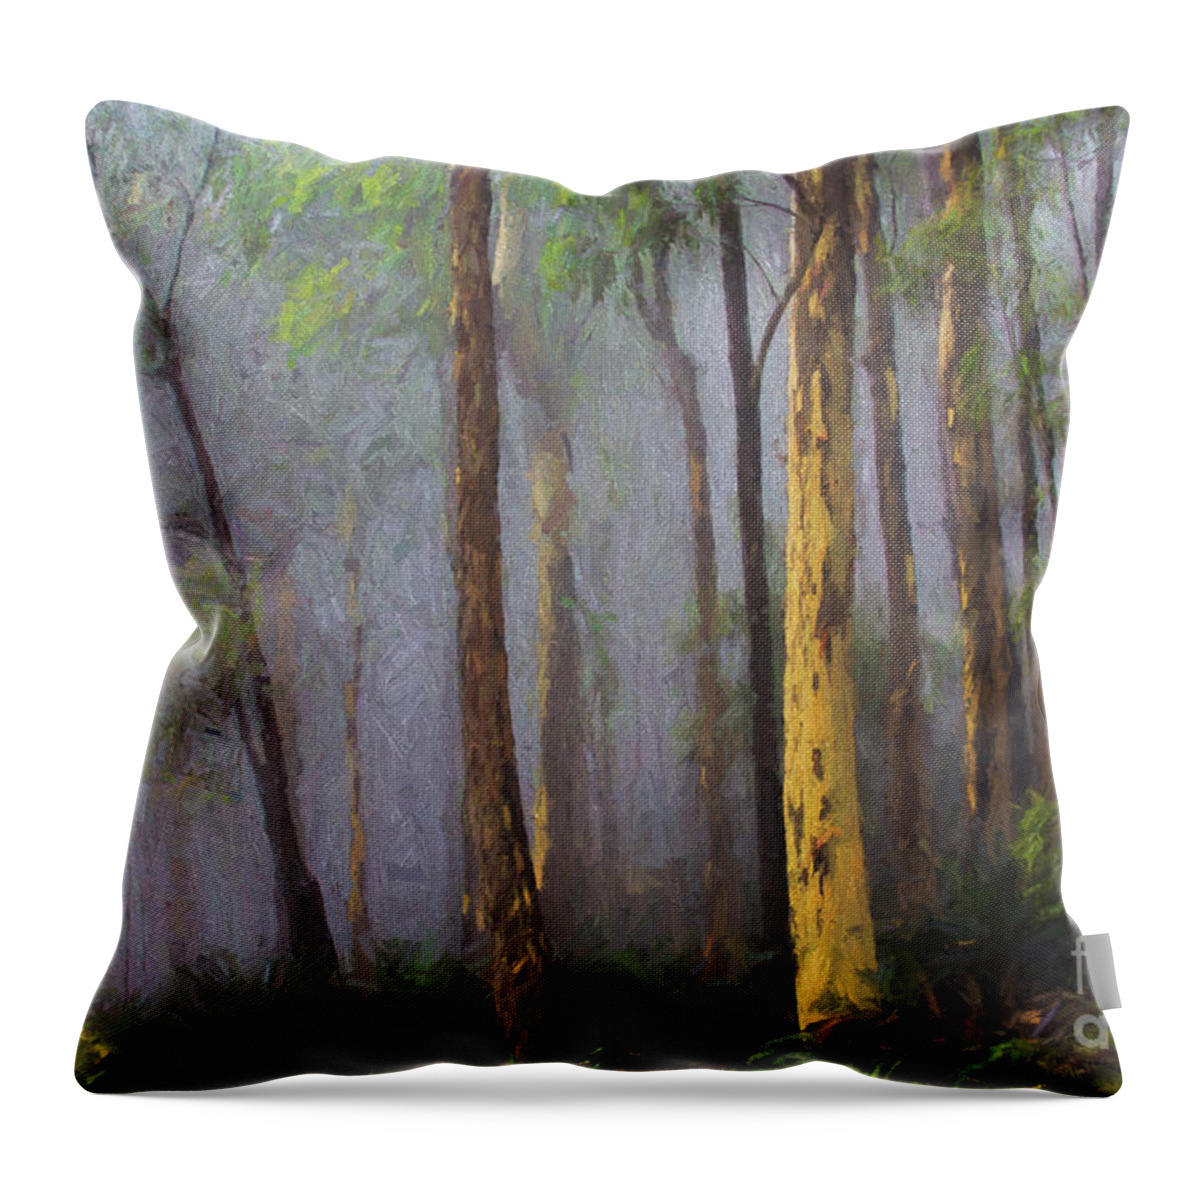 Mist Throw Pillow featuring the photograph Mist in forest by Sheila Smart Fine Art Photography